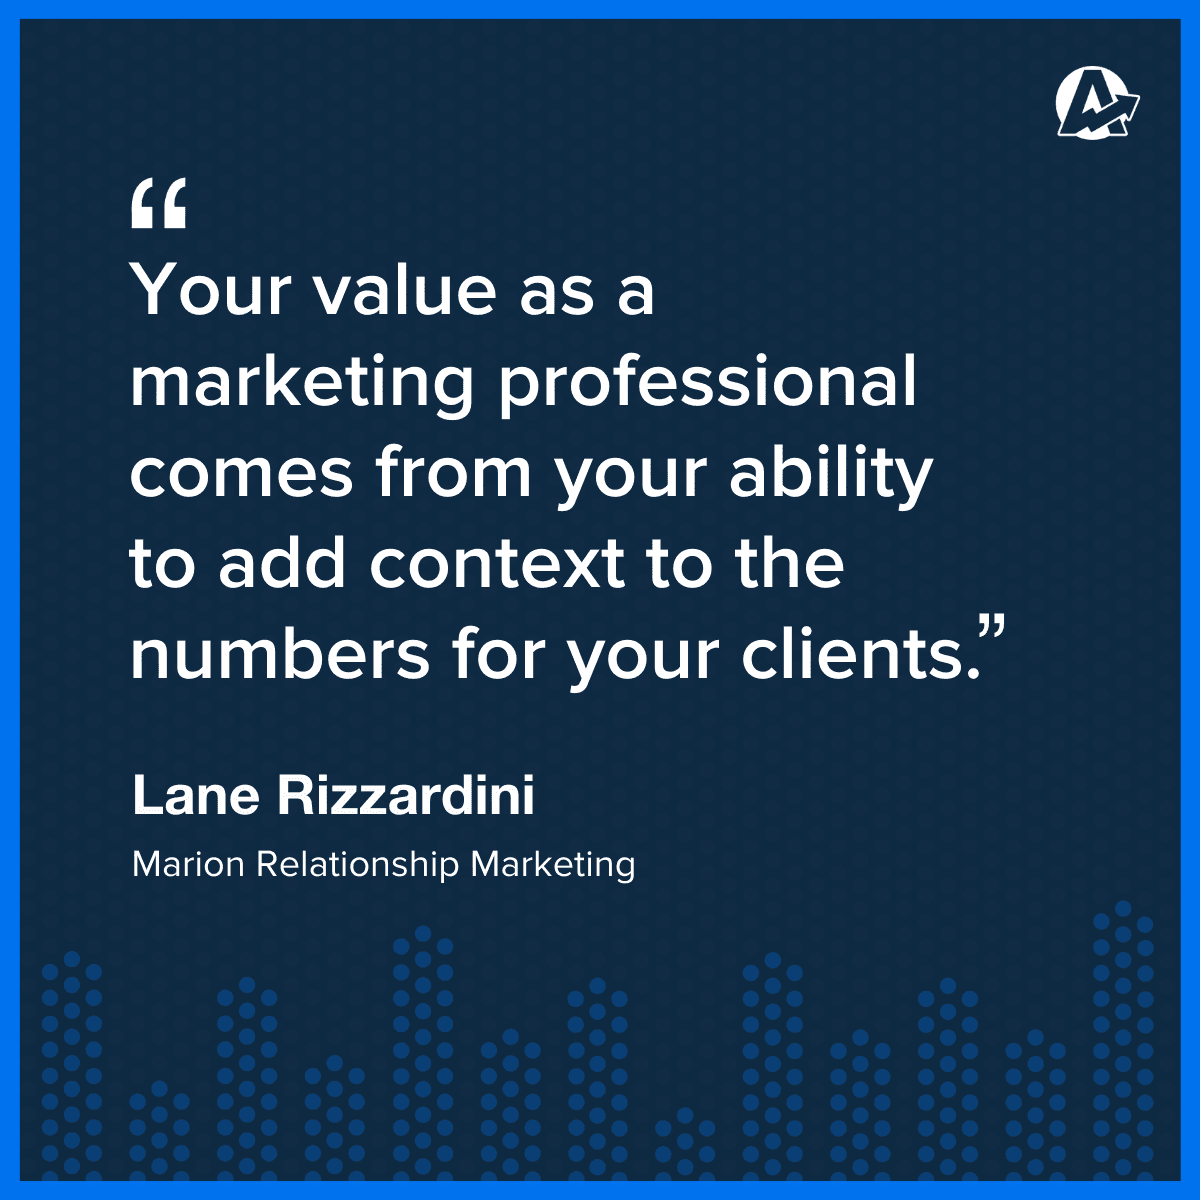 Your value as a marketing professional comes from your ability to add context to the numbers for your clients. - Quote by Lane Rizzardini